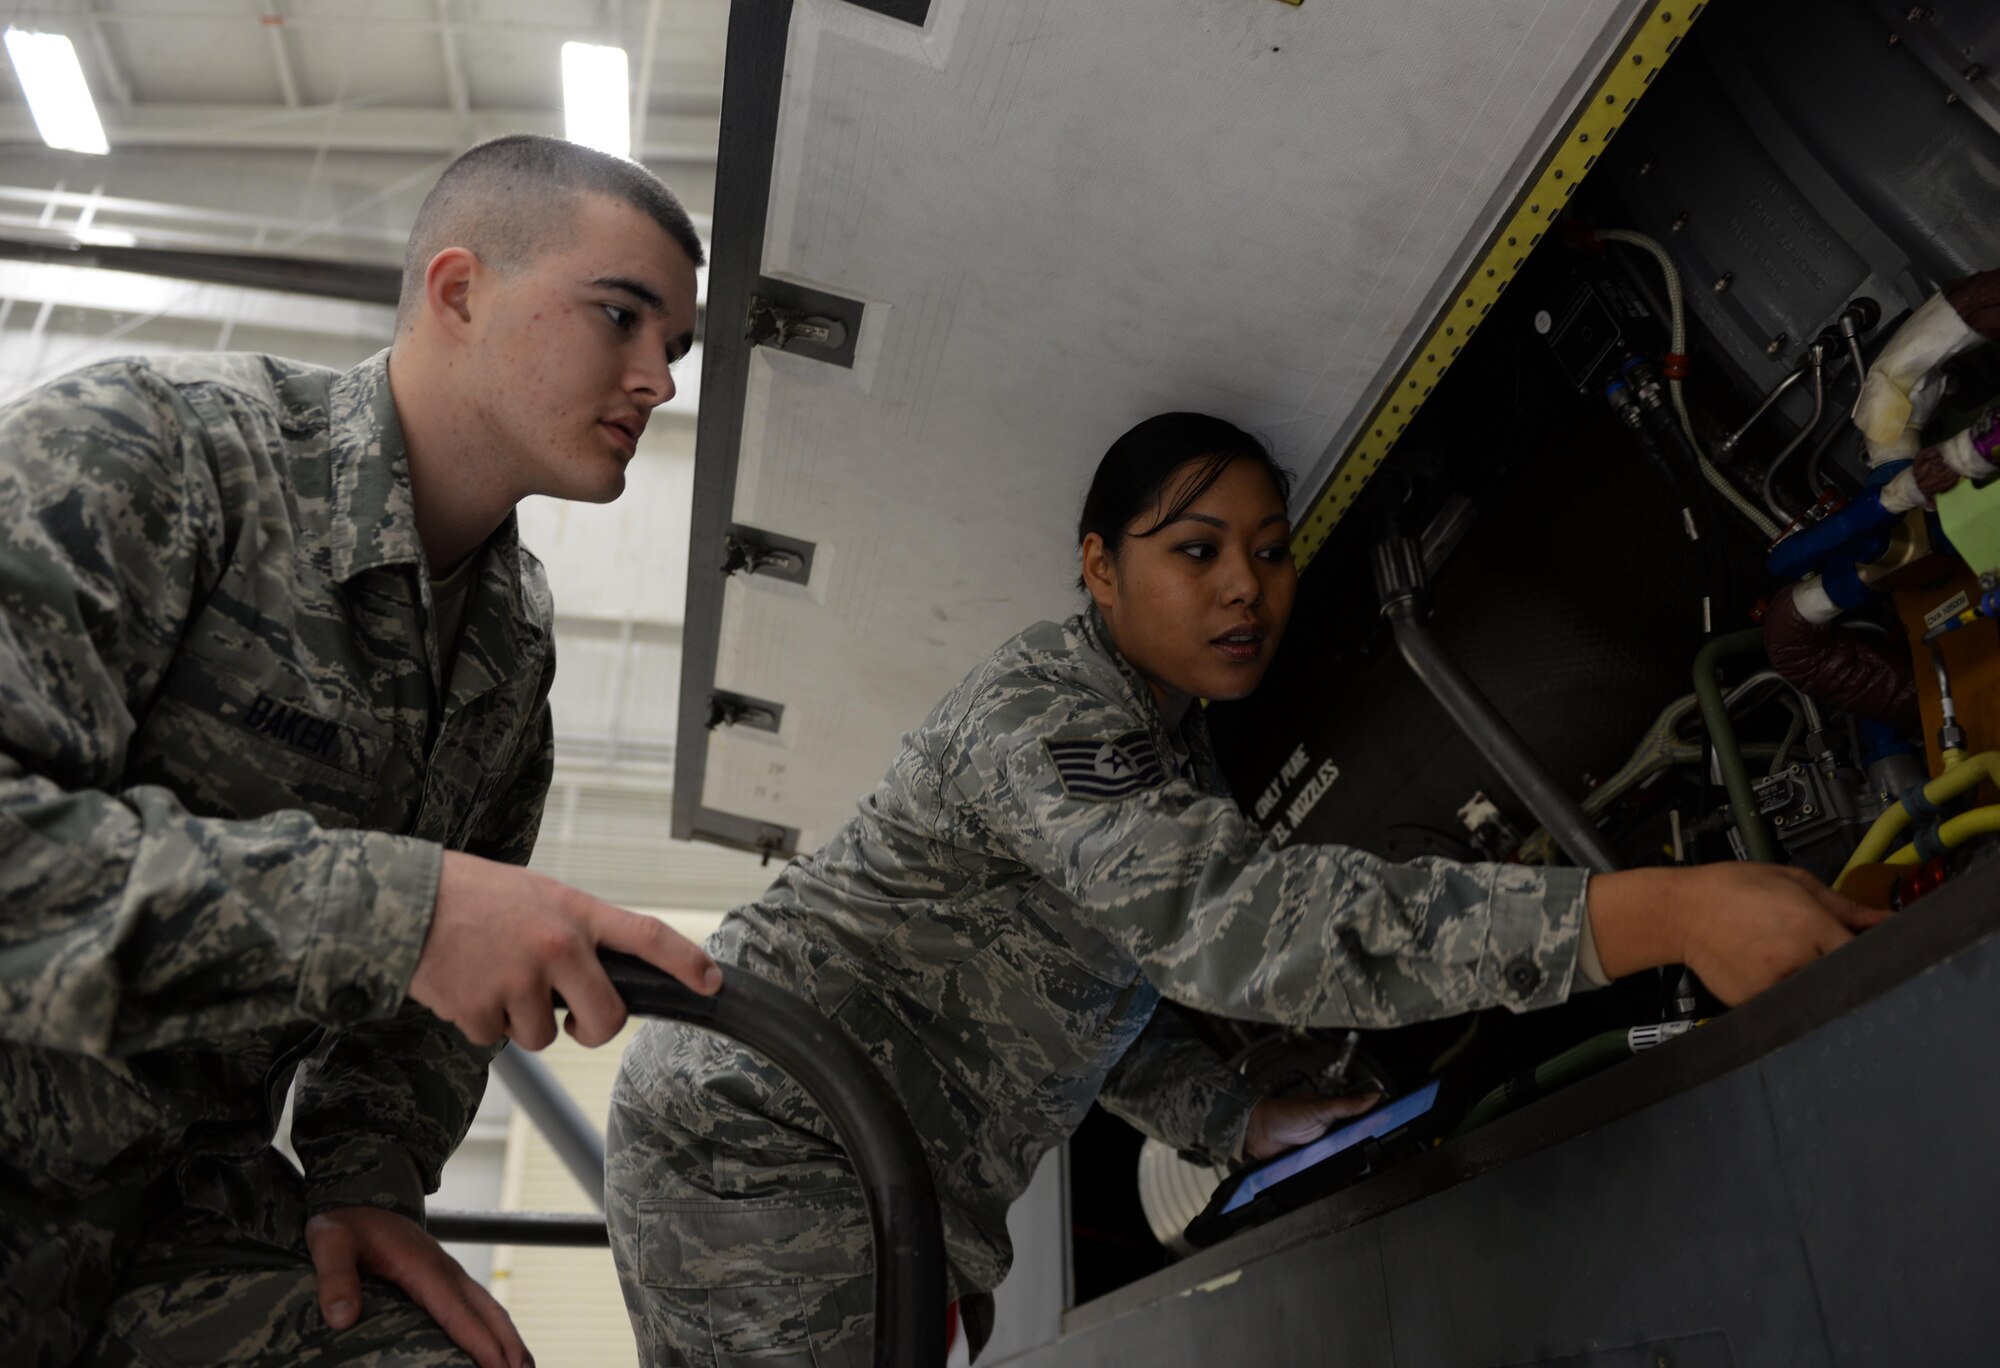 Tech. Sgt. Maureen Madamba (right), 372nd Training Squadron Detachment 21 maintenance instructor, instructs Airman Basic Lain Baker, 372nd TRS Detachment 21 student, how to properly inspect interior components of a RQ-4 Global Hawk Jan. 20, 2015, at Beale Air Force Base, Calif. Madamba is tasked with teaching the first class of the RQ-4 remotely piloted aircraft maintenance course. (U.S. Air Force photo by Senior Airman Bobby Cummings)